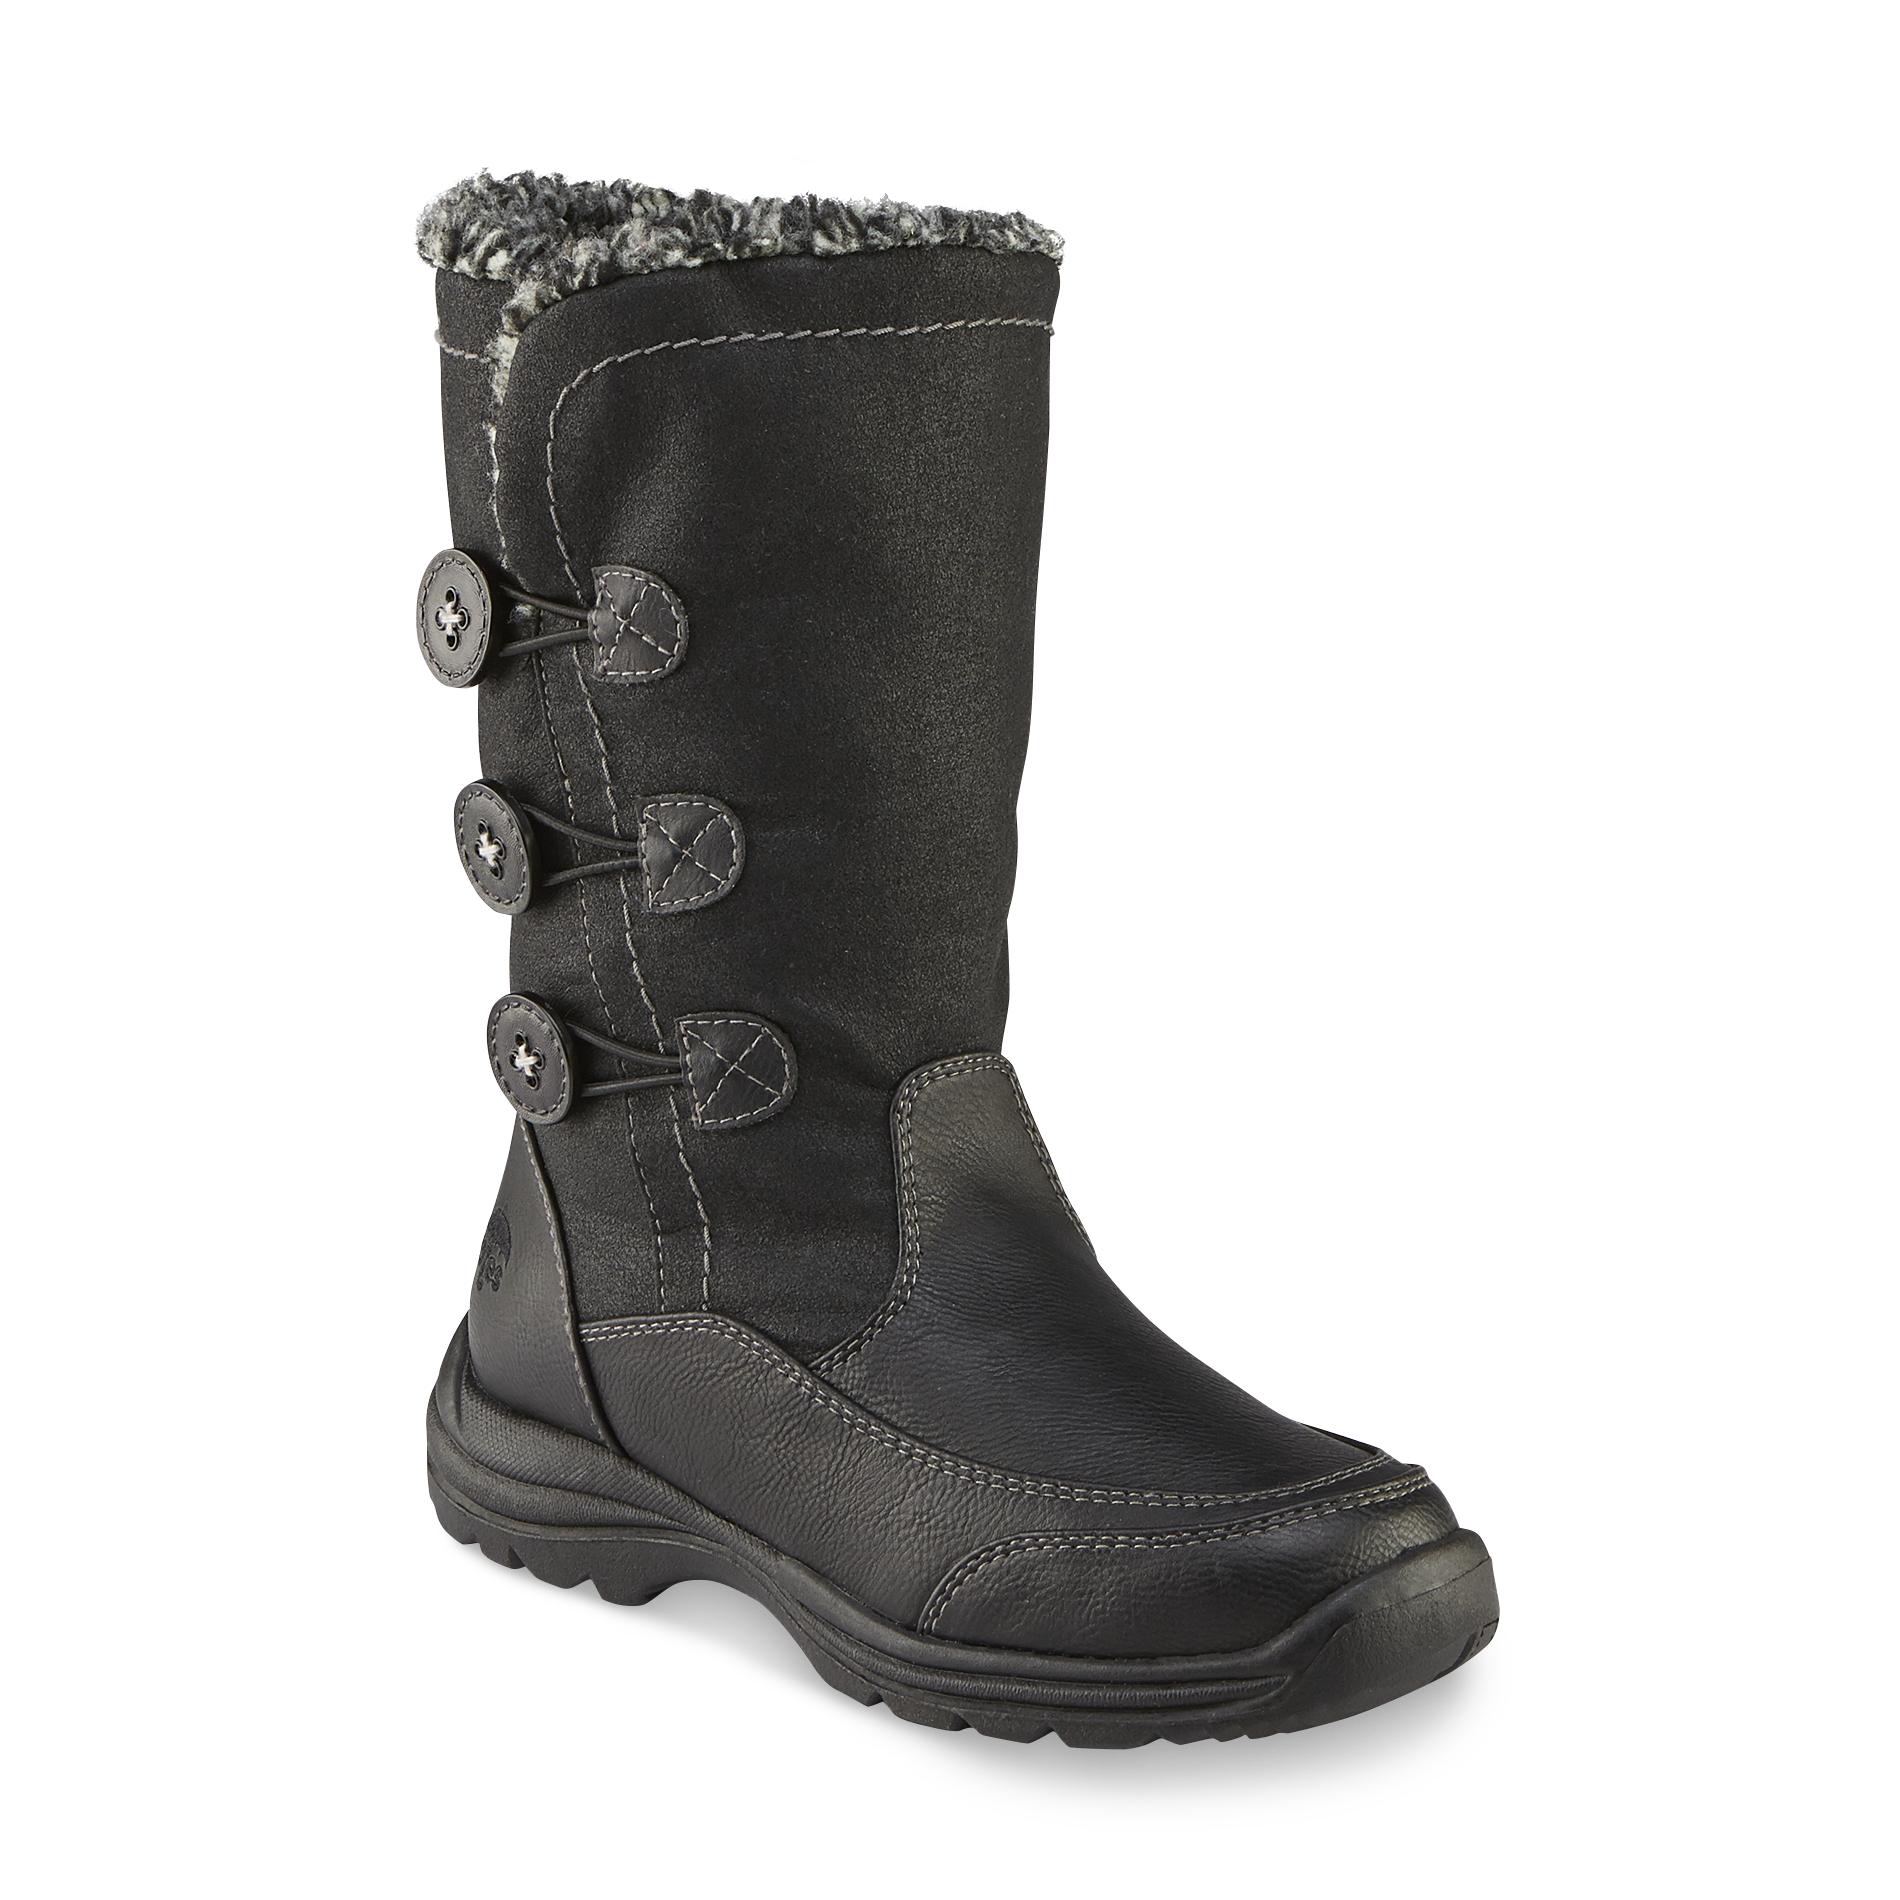 Totes Women's Mya Winter/Weather Boot - Black Wide Width Avail | Shop ...